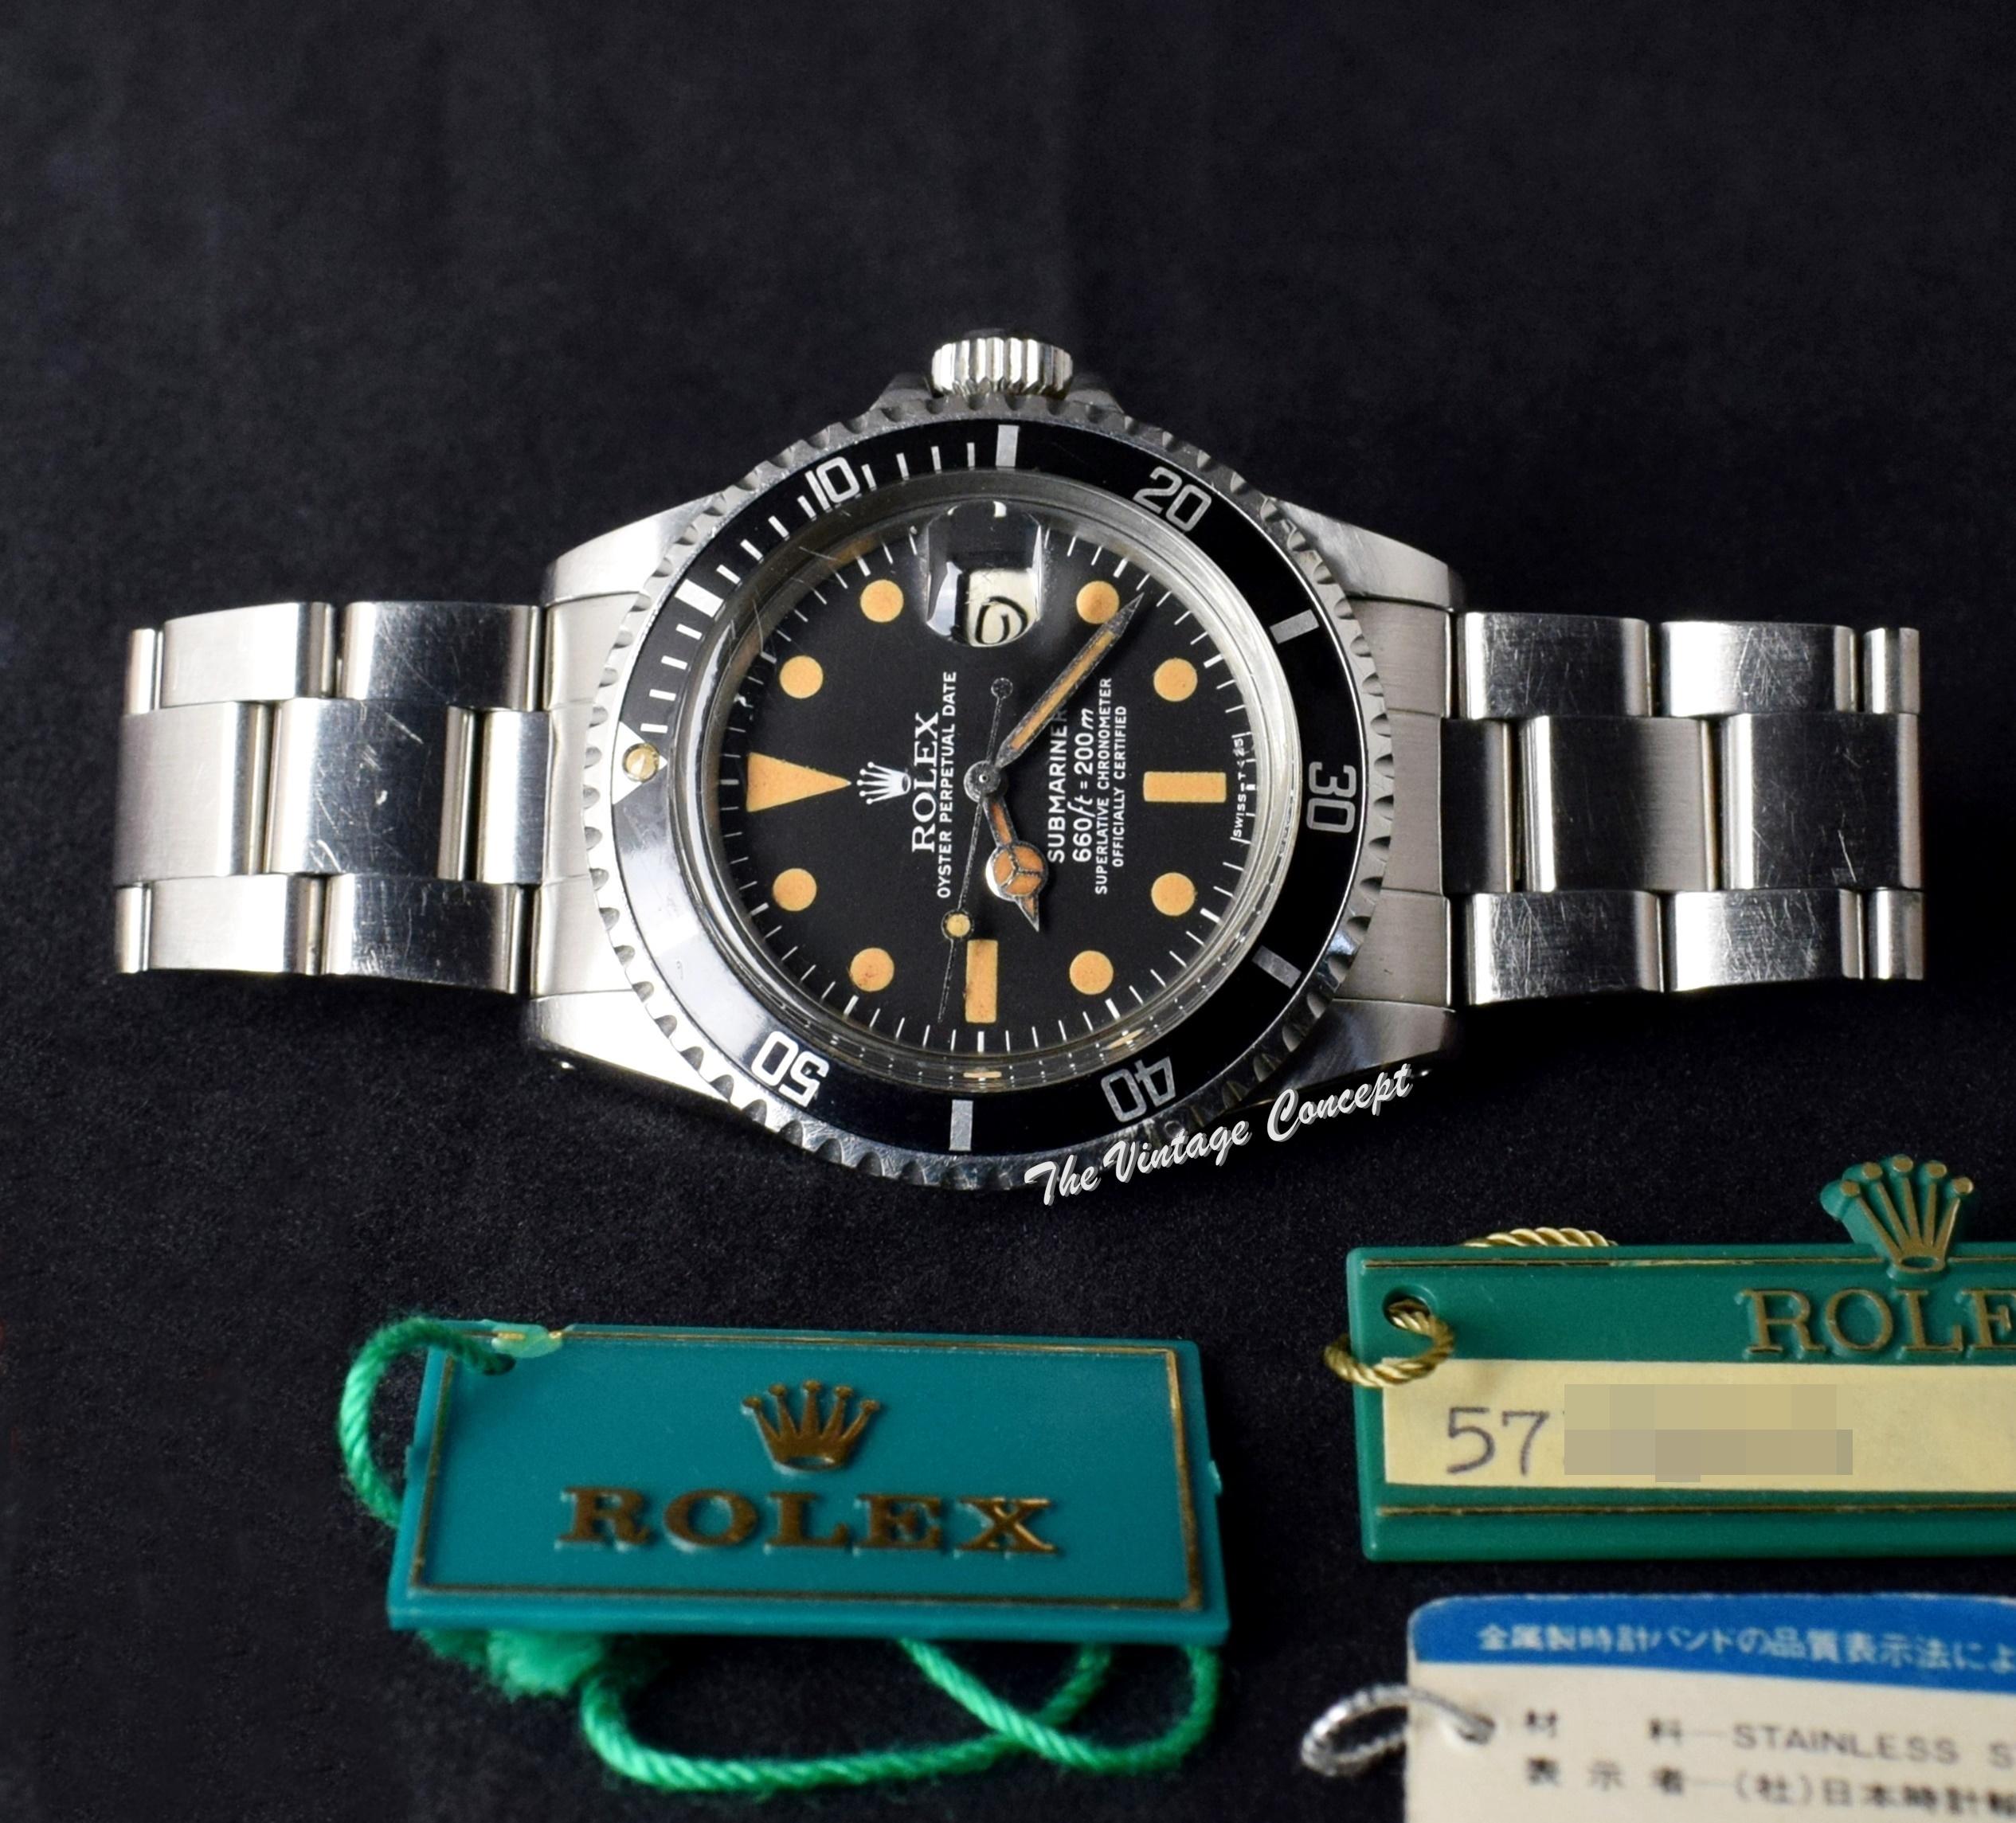 Brand: Vintage Rolex
Model: 1680
Year: 1978
Serial number: 57xxxxx
Reference: OT1507

Case: Show sign of wear with slight polish from previous; inner case back stamped 1680

Dial: Excellent Aged Condition Tritium Dial where the lumes have turned